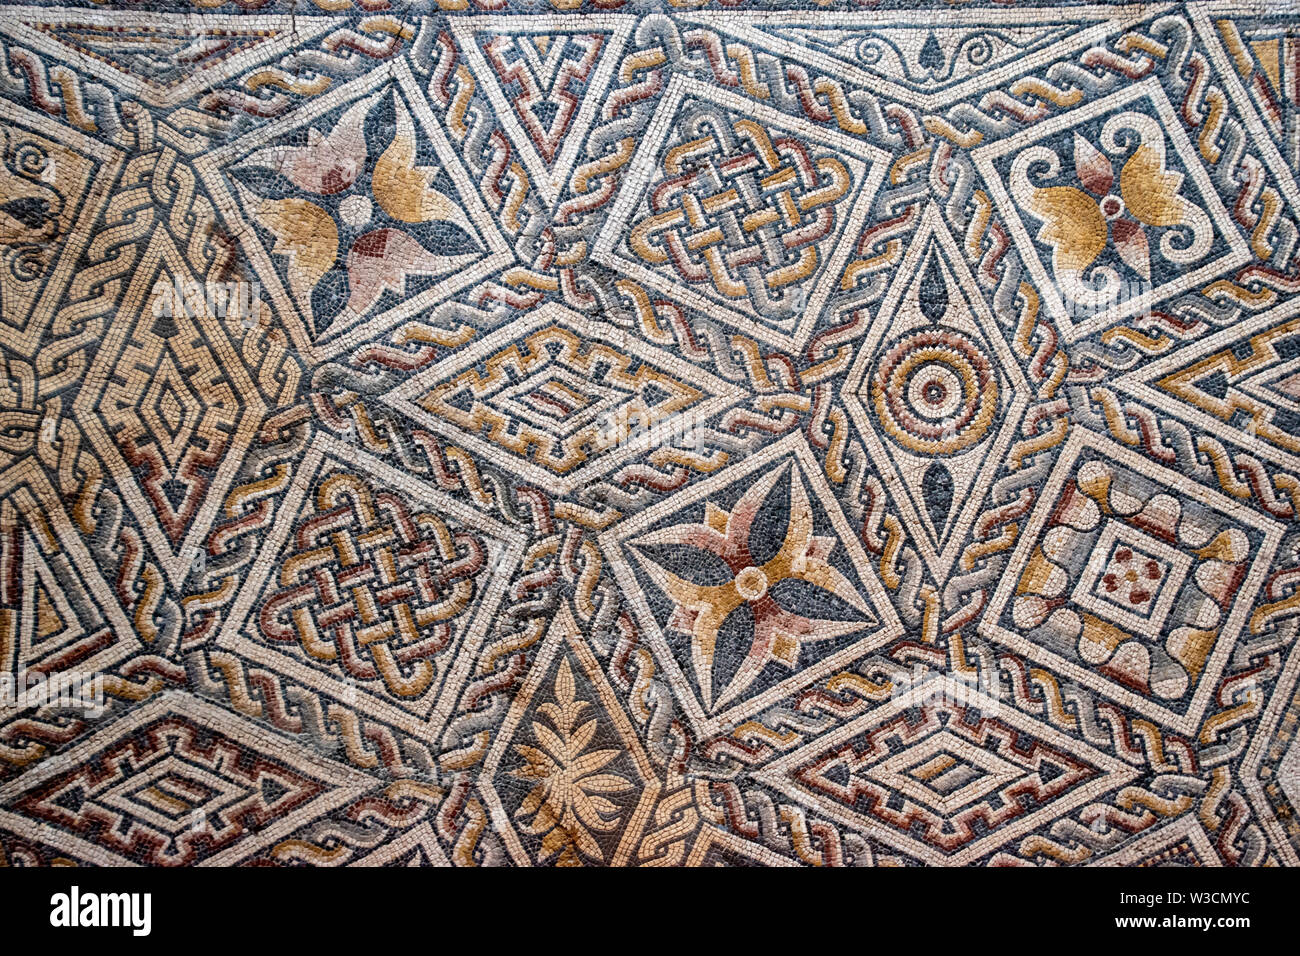 A detailed and intricate Roman mosaic with geometric and natural ...